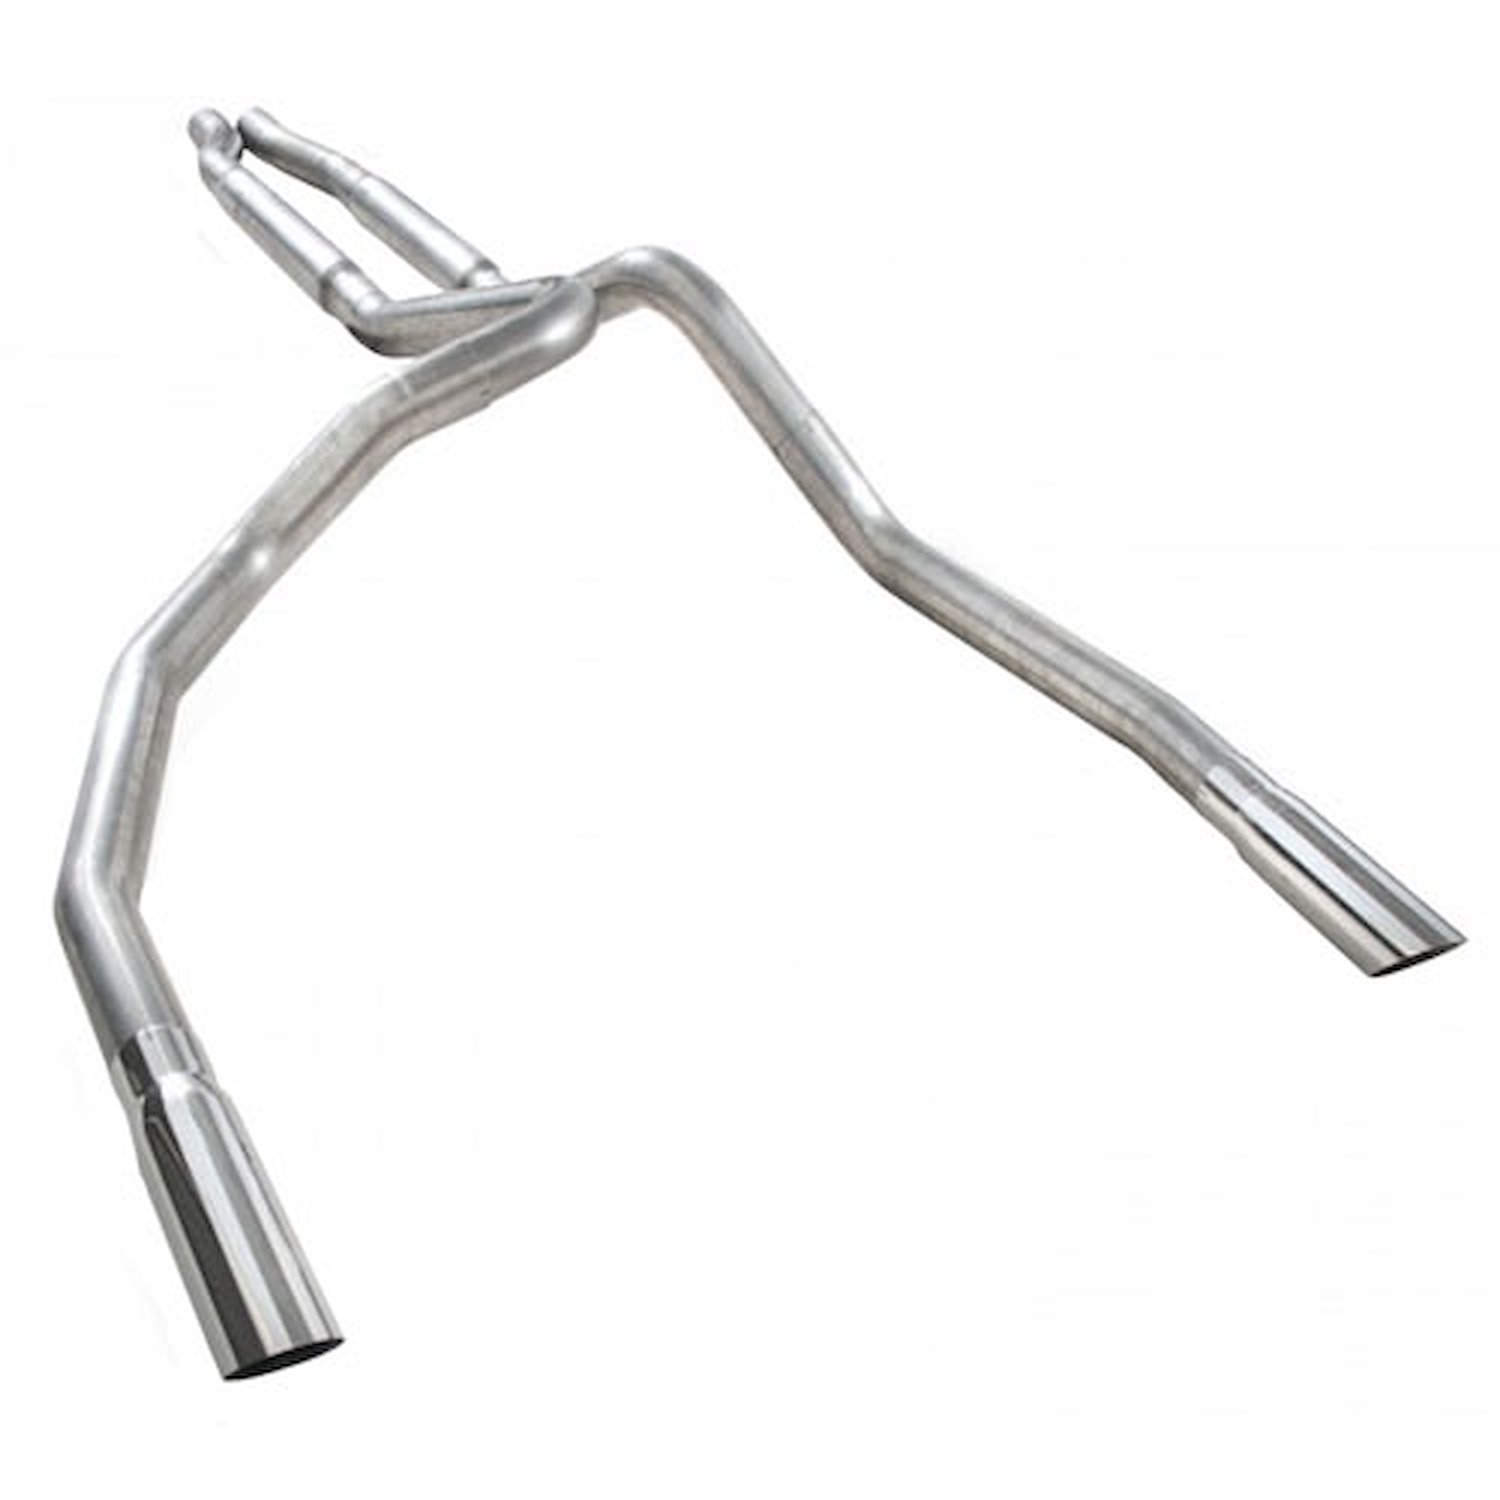 Improve sound and performance with our Ford F-150 2011-12 exhaust system. This 3 exhaust system is c